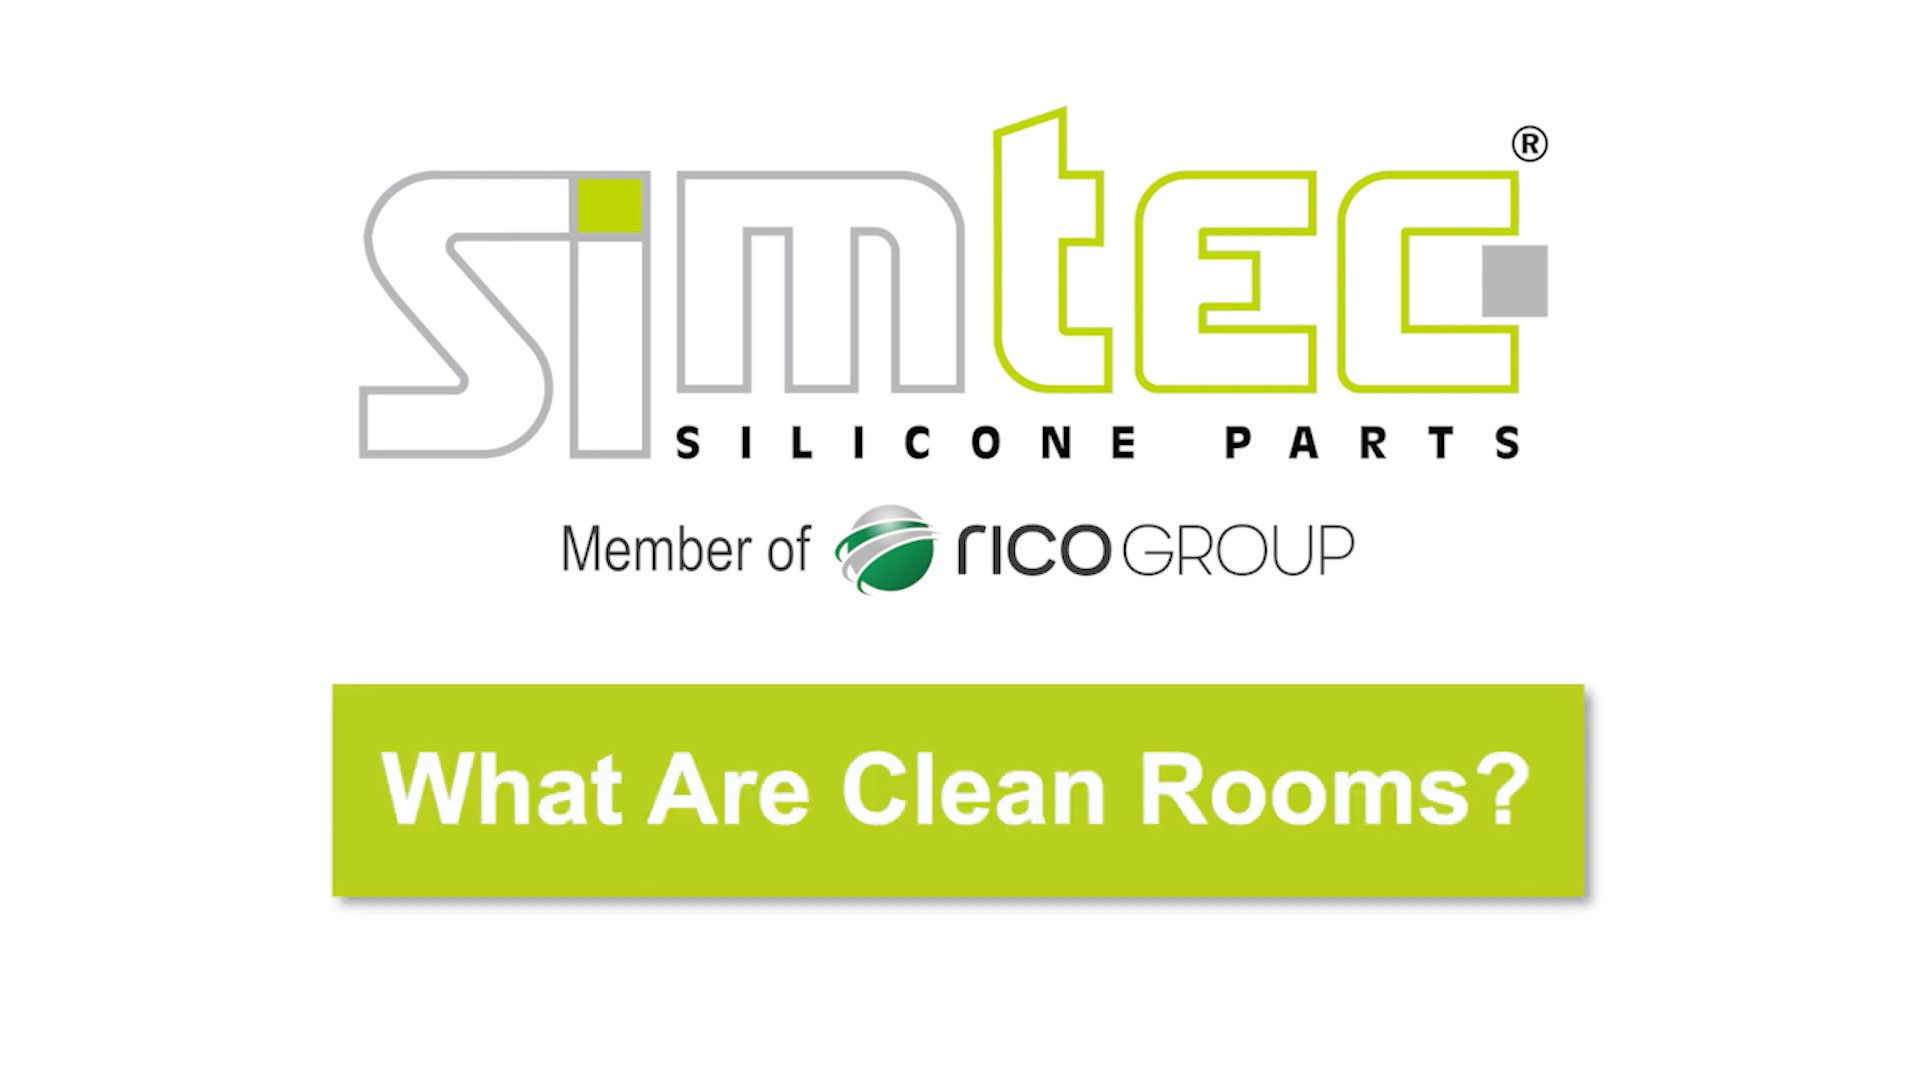 What are clean rooms?